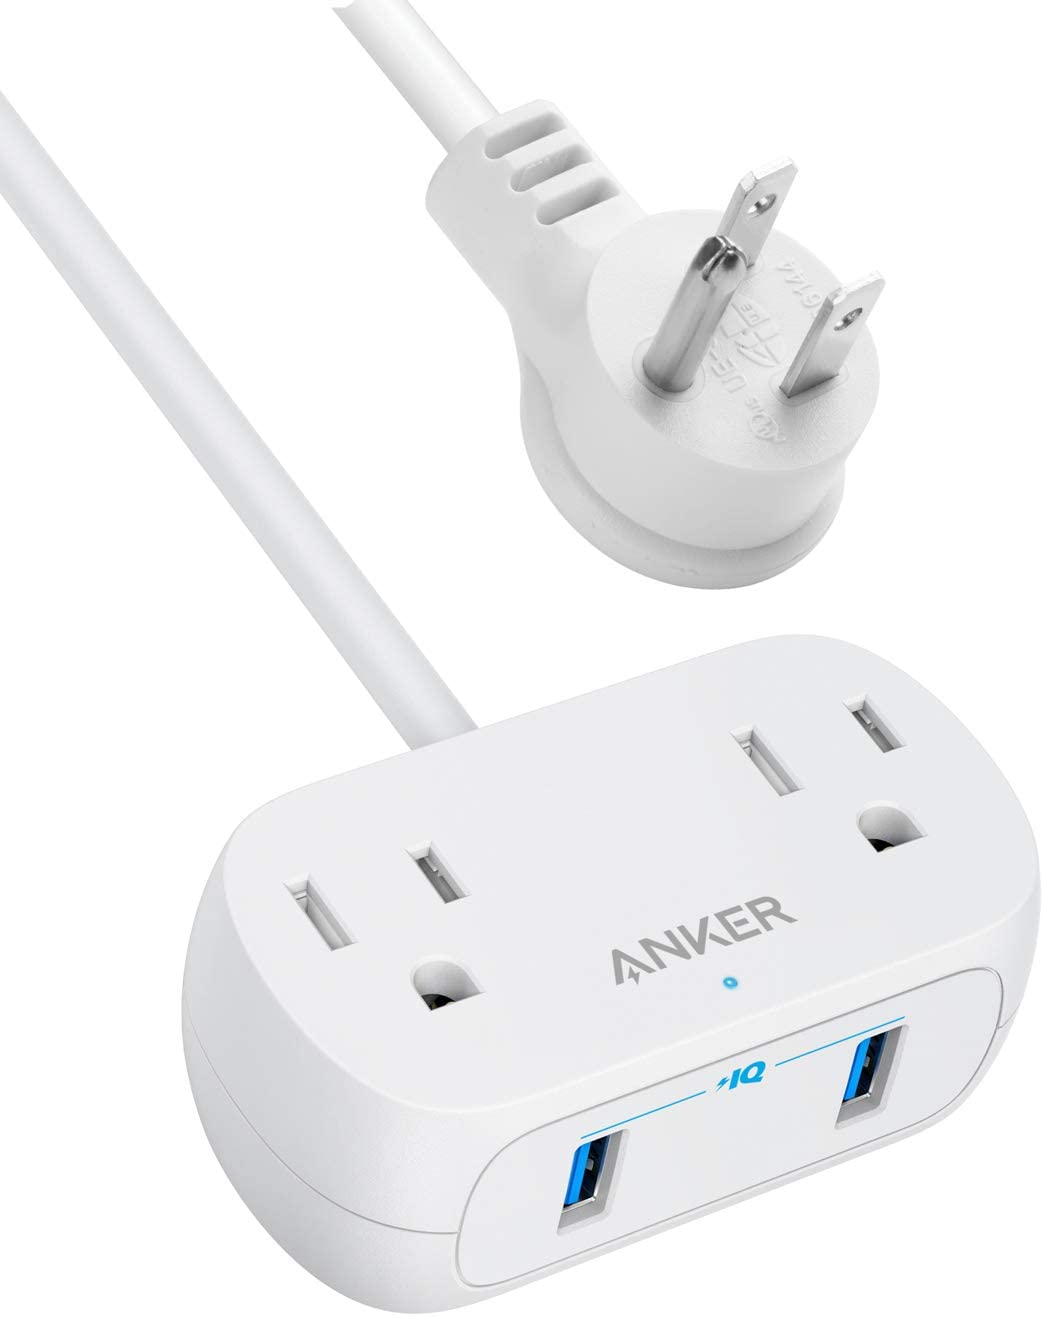 5' Anker Power Strip w/ 2 Outlets & 2 USB Ports $9.99 + Free Prime Shipping